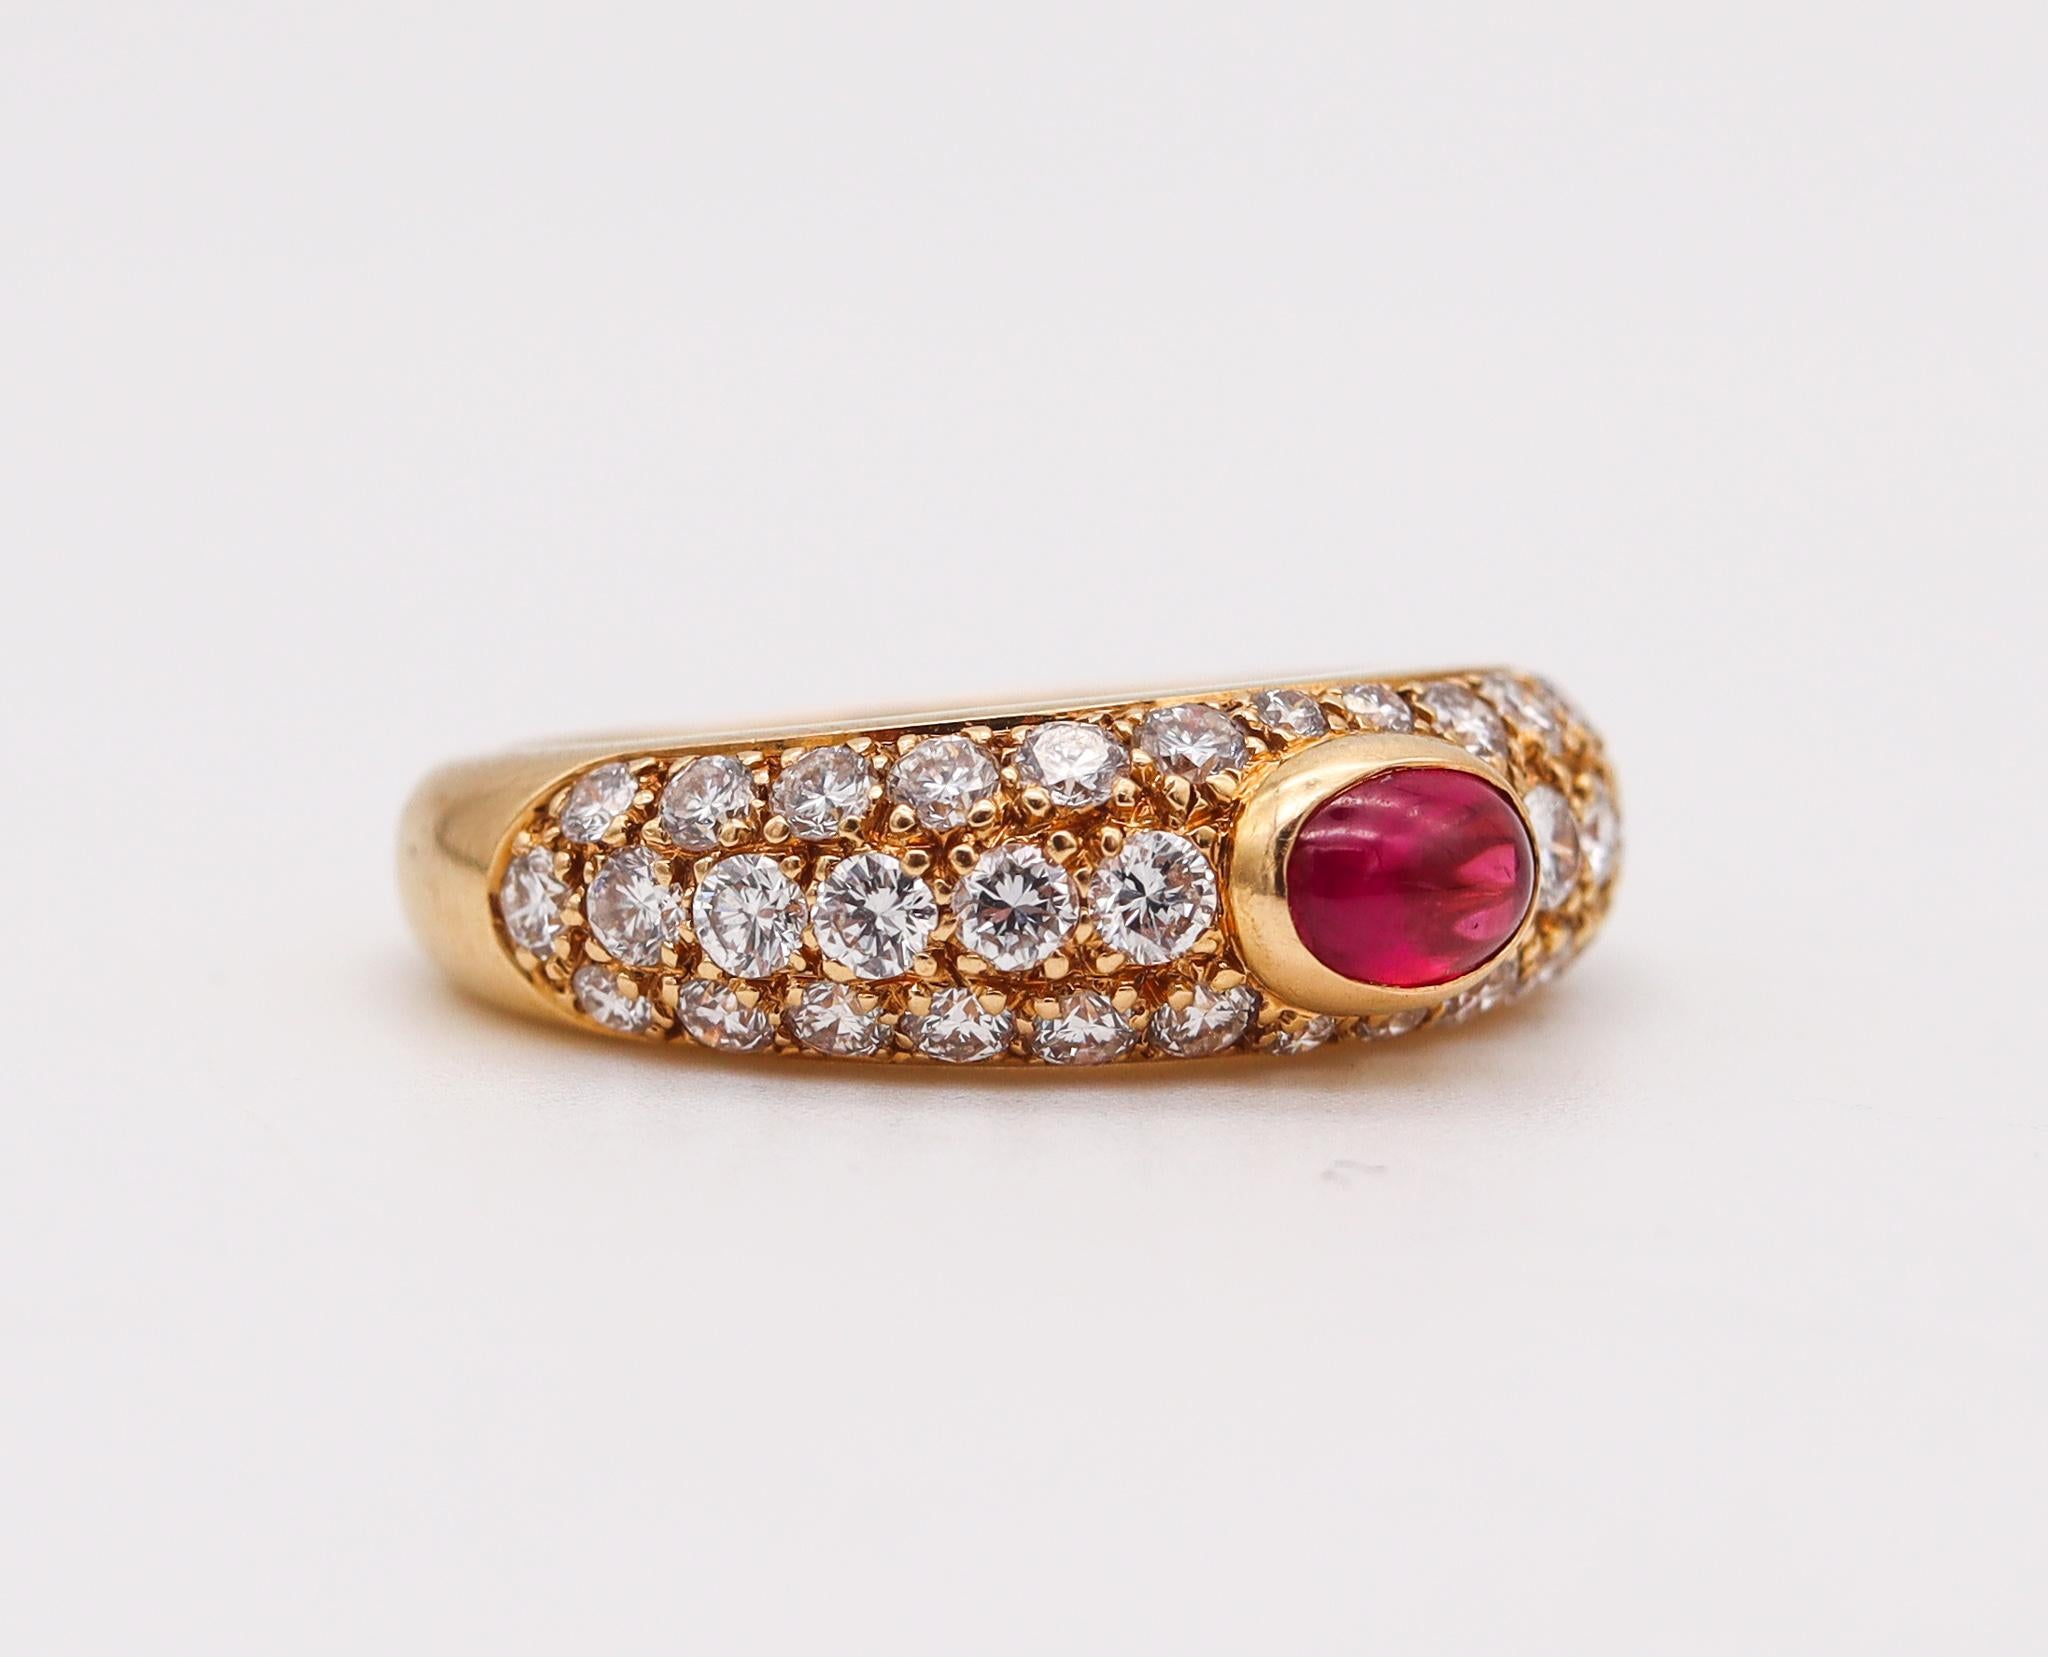 Cartier Paris Gems Set Ring in 18Kt Gold with 2.29 Cts Diamond and Burmese Ruby 2